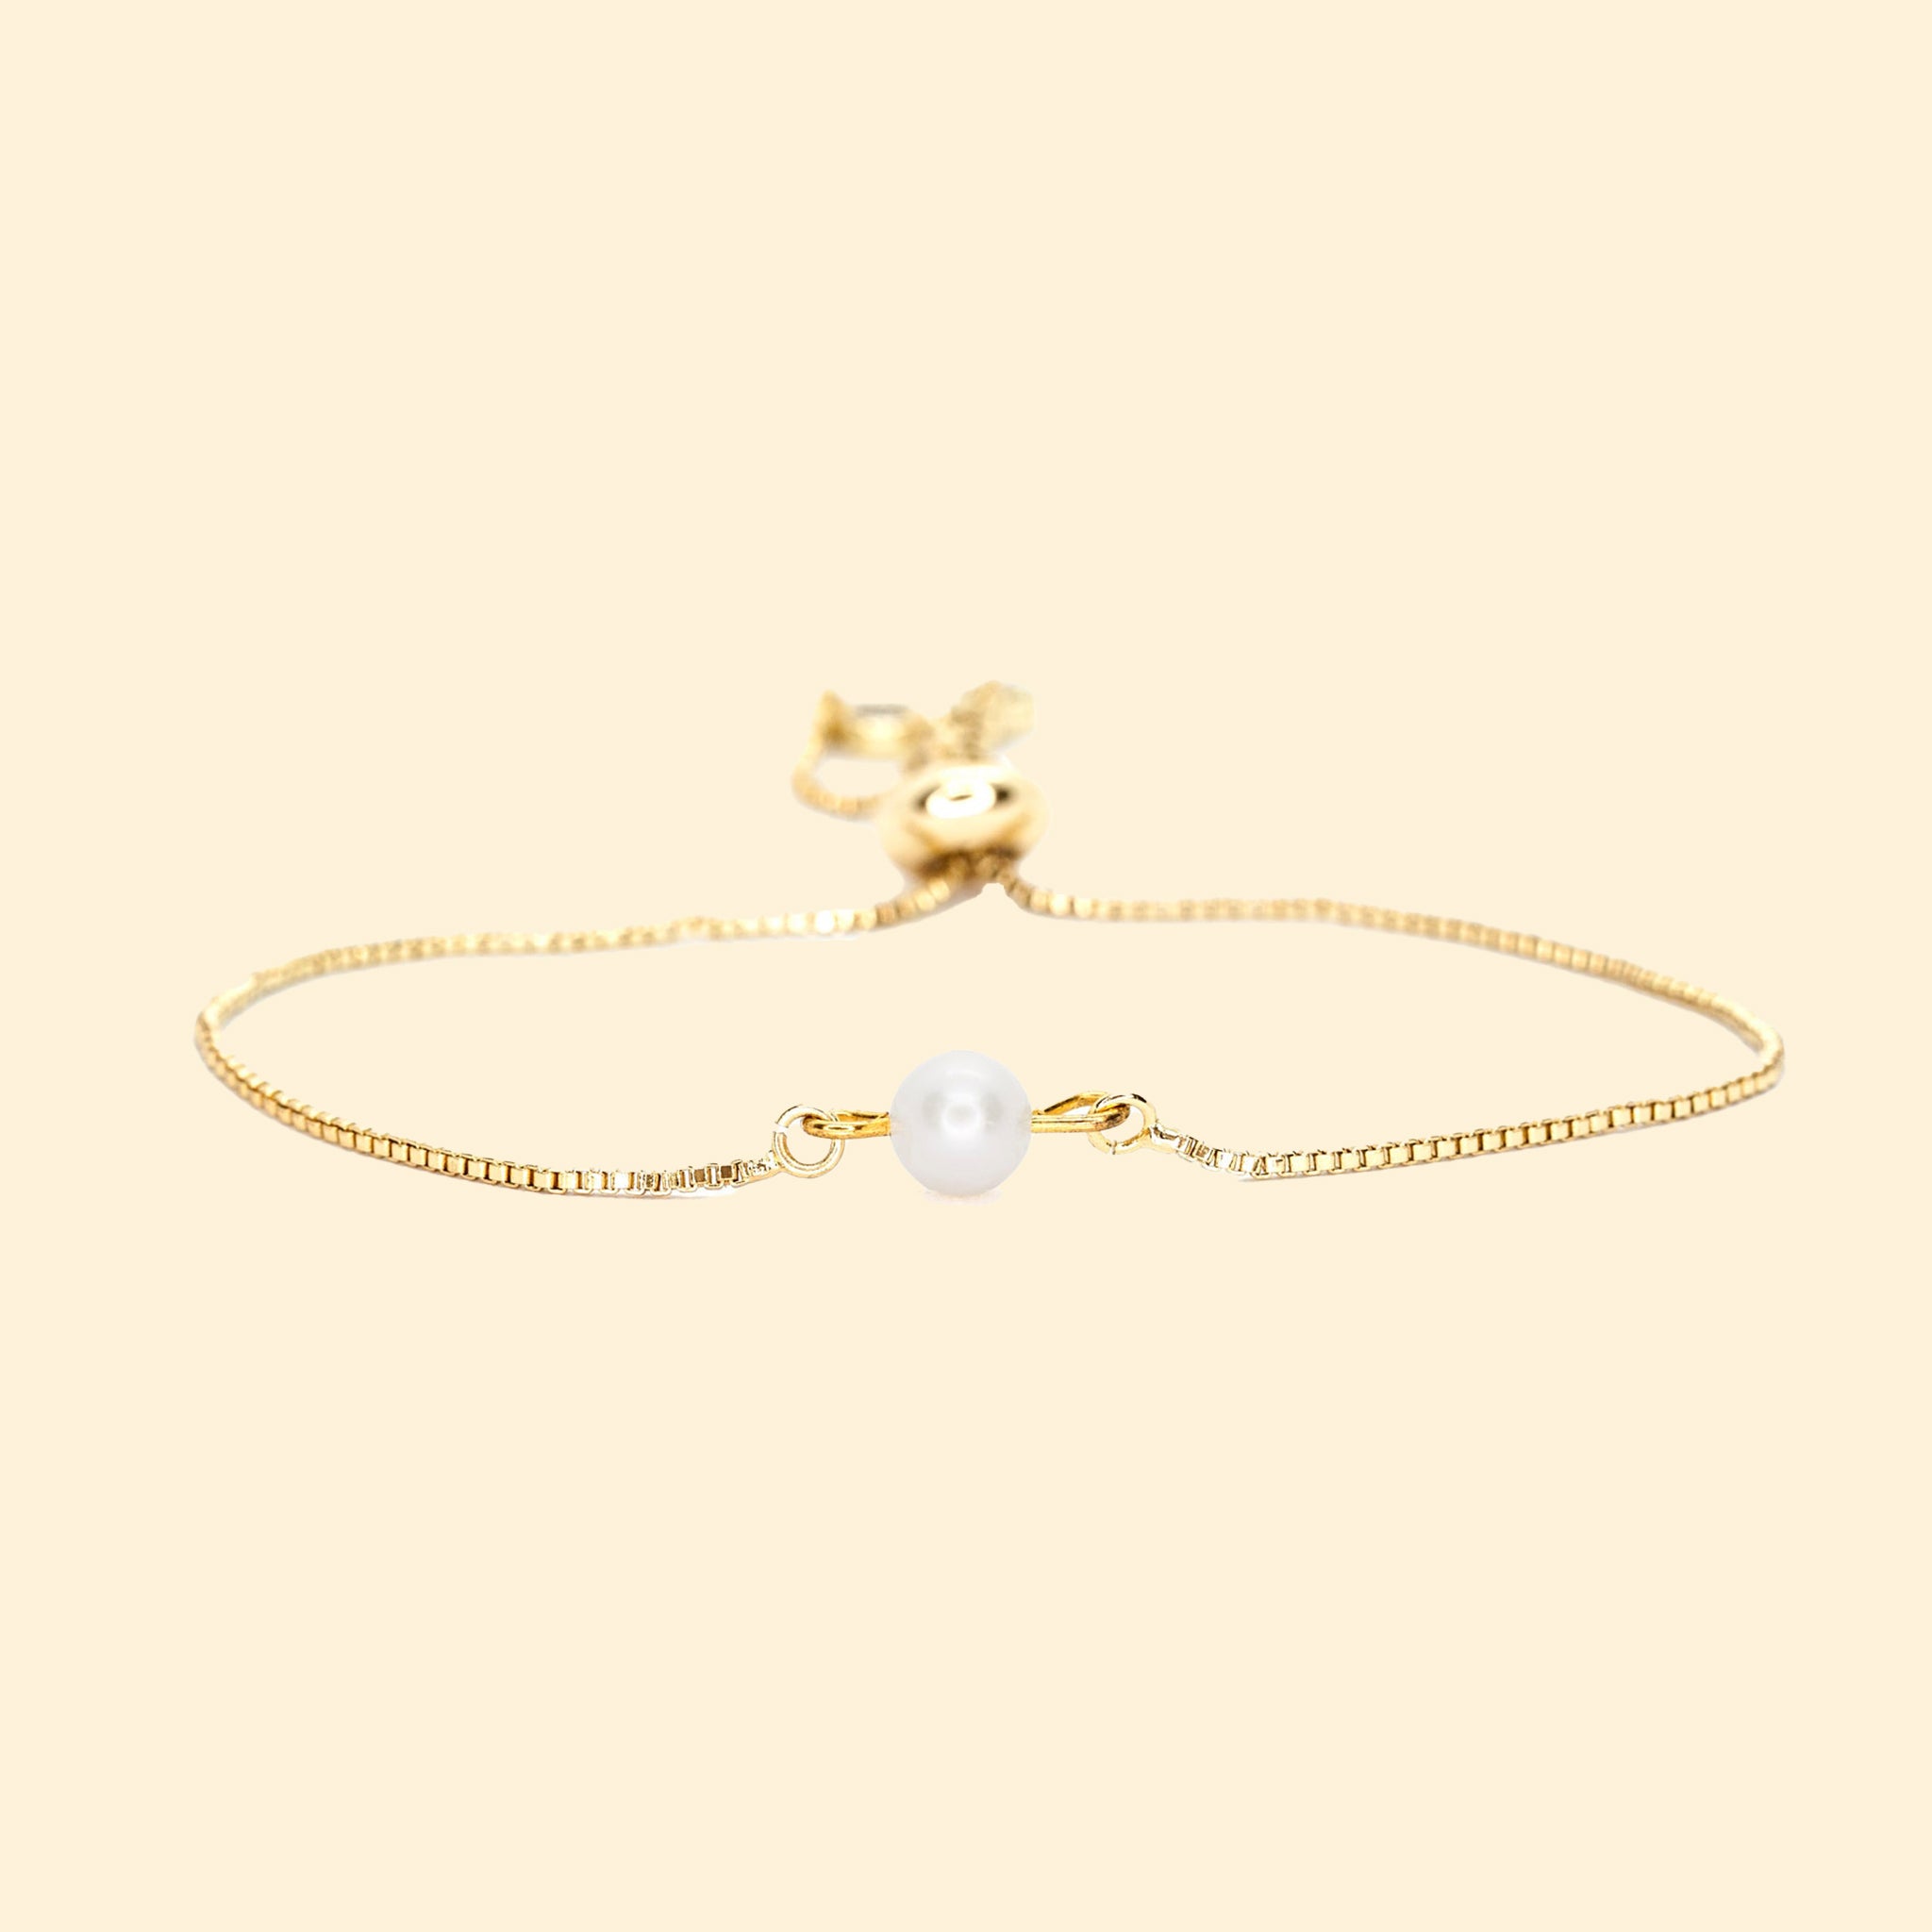 A circle freshwater pearl in the center of a dainty chain bracelet. 